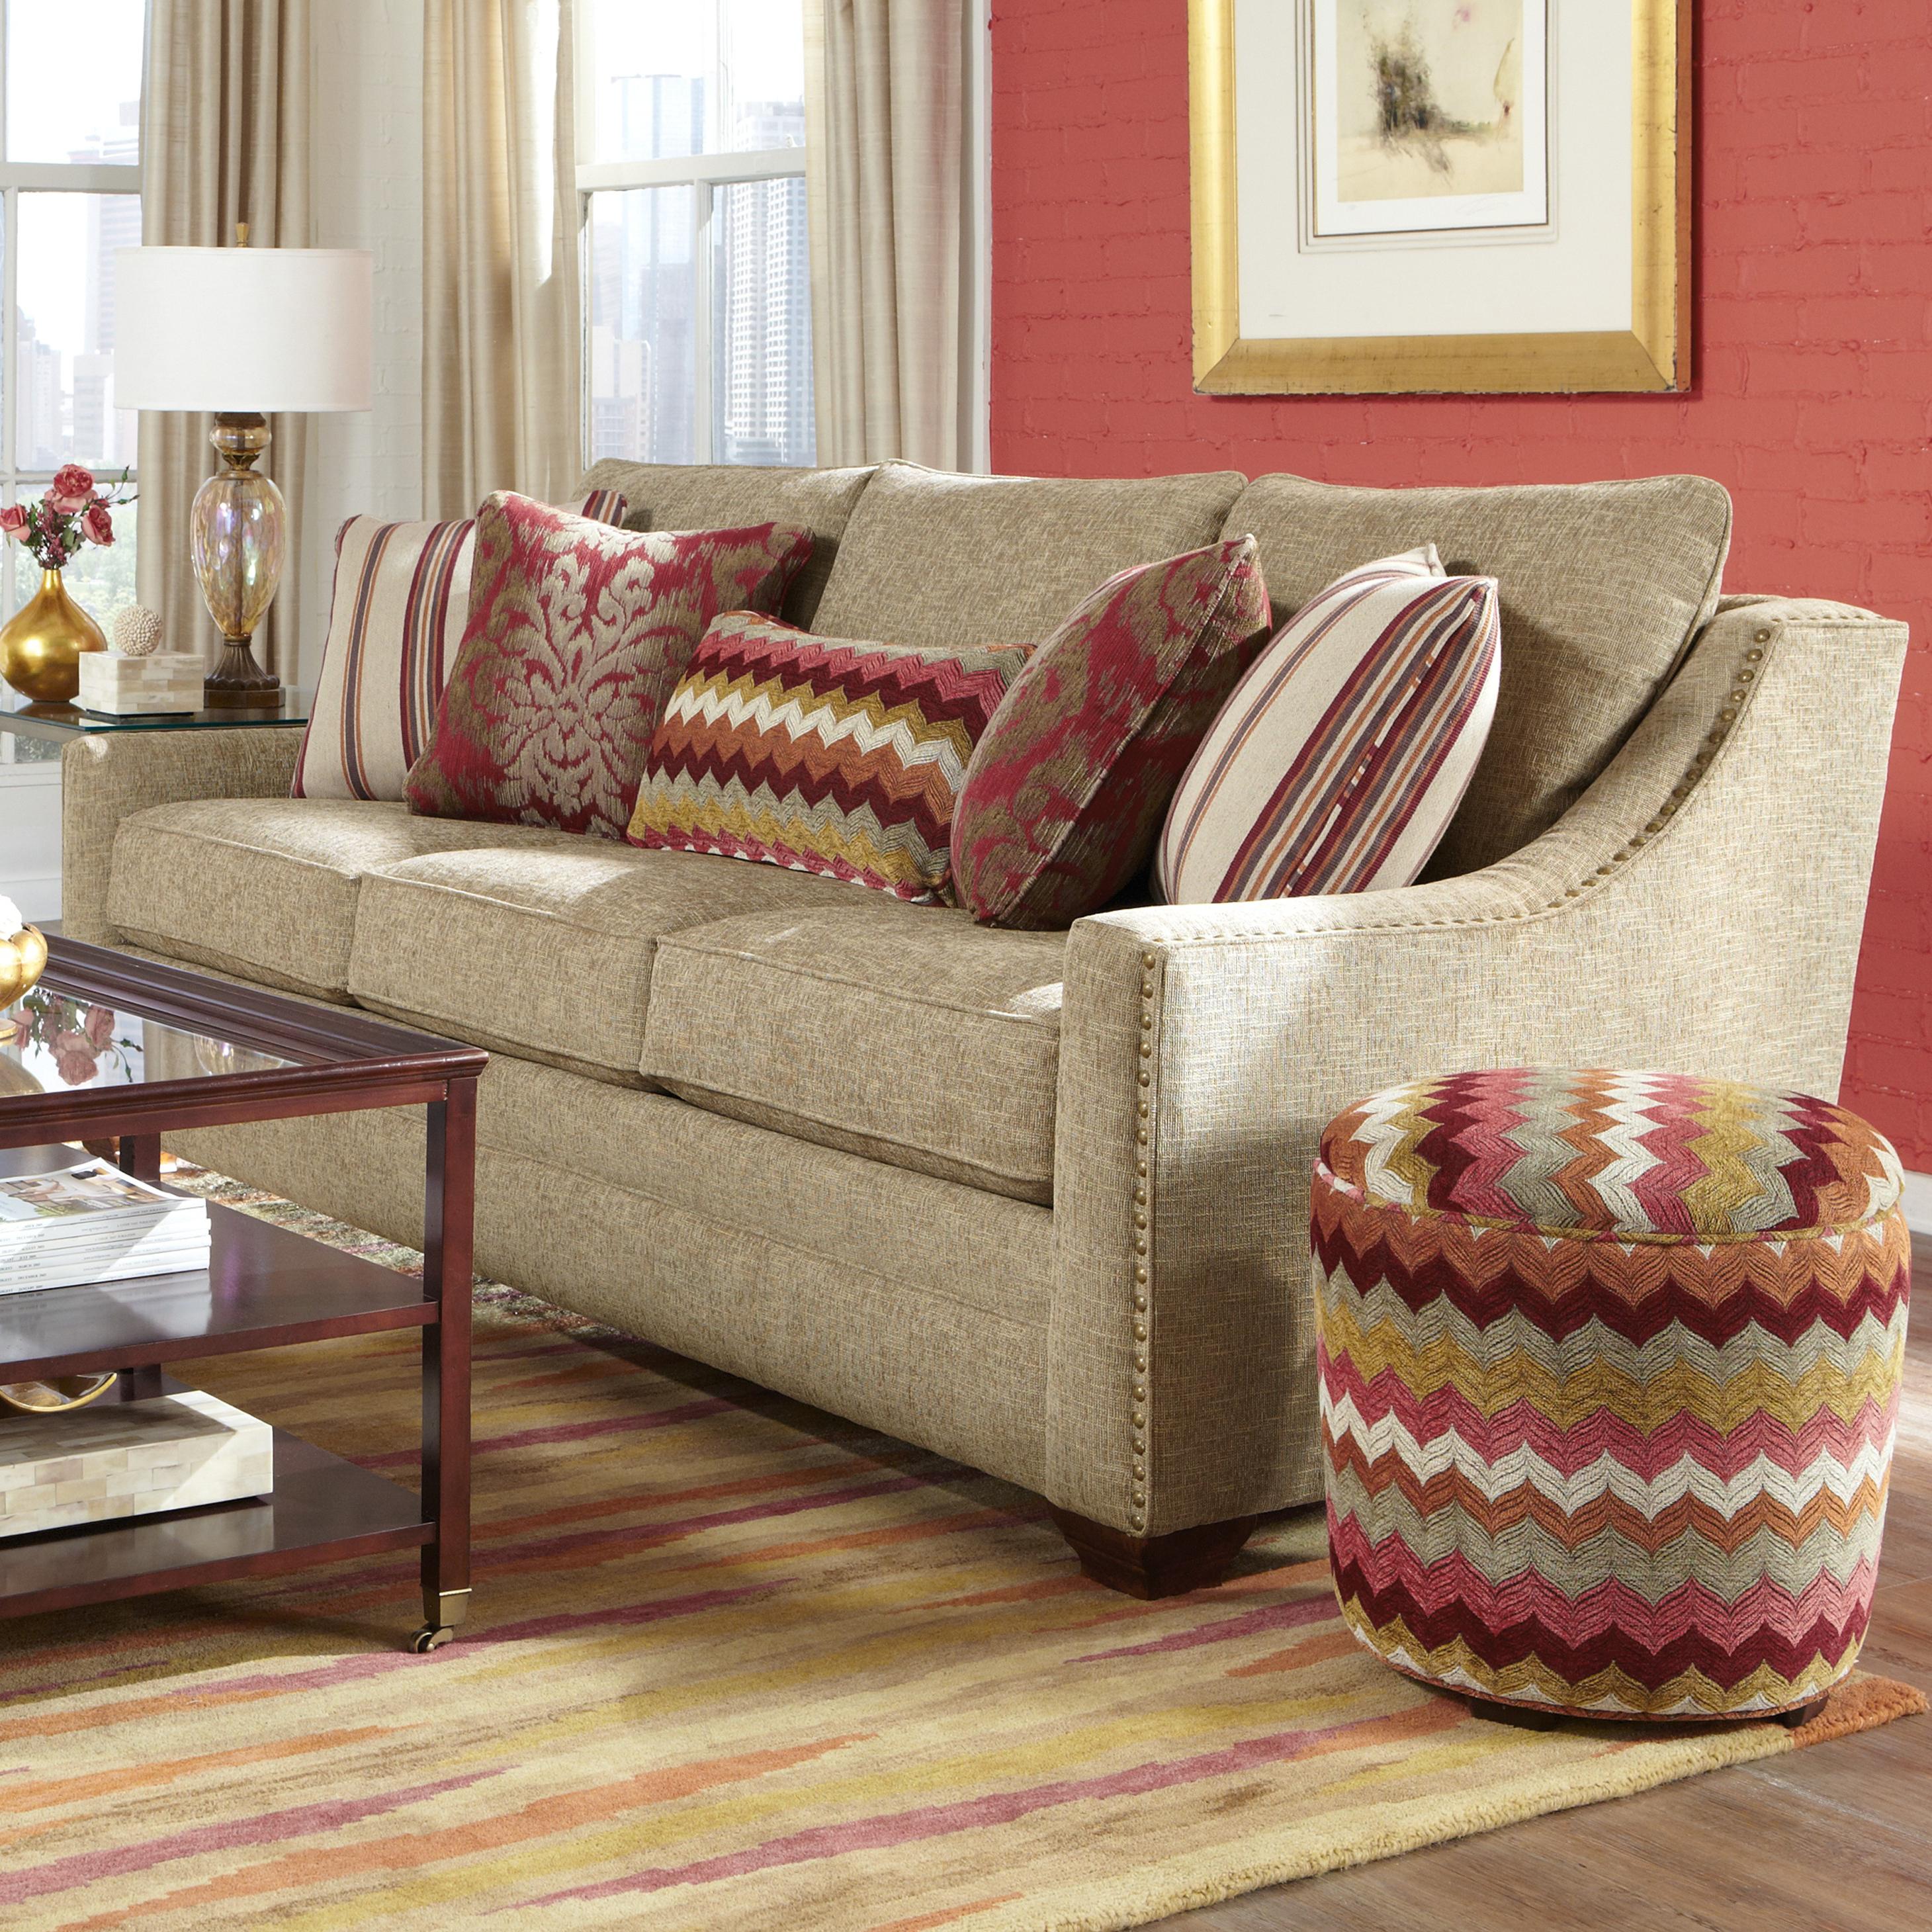 Transitional Sofa with Oversized Nailheads and Toss Pillows